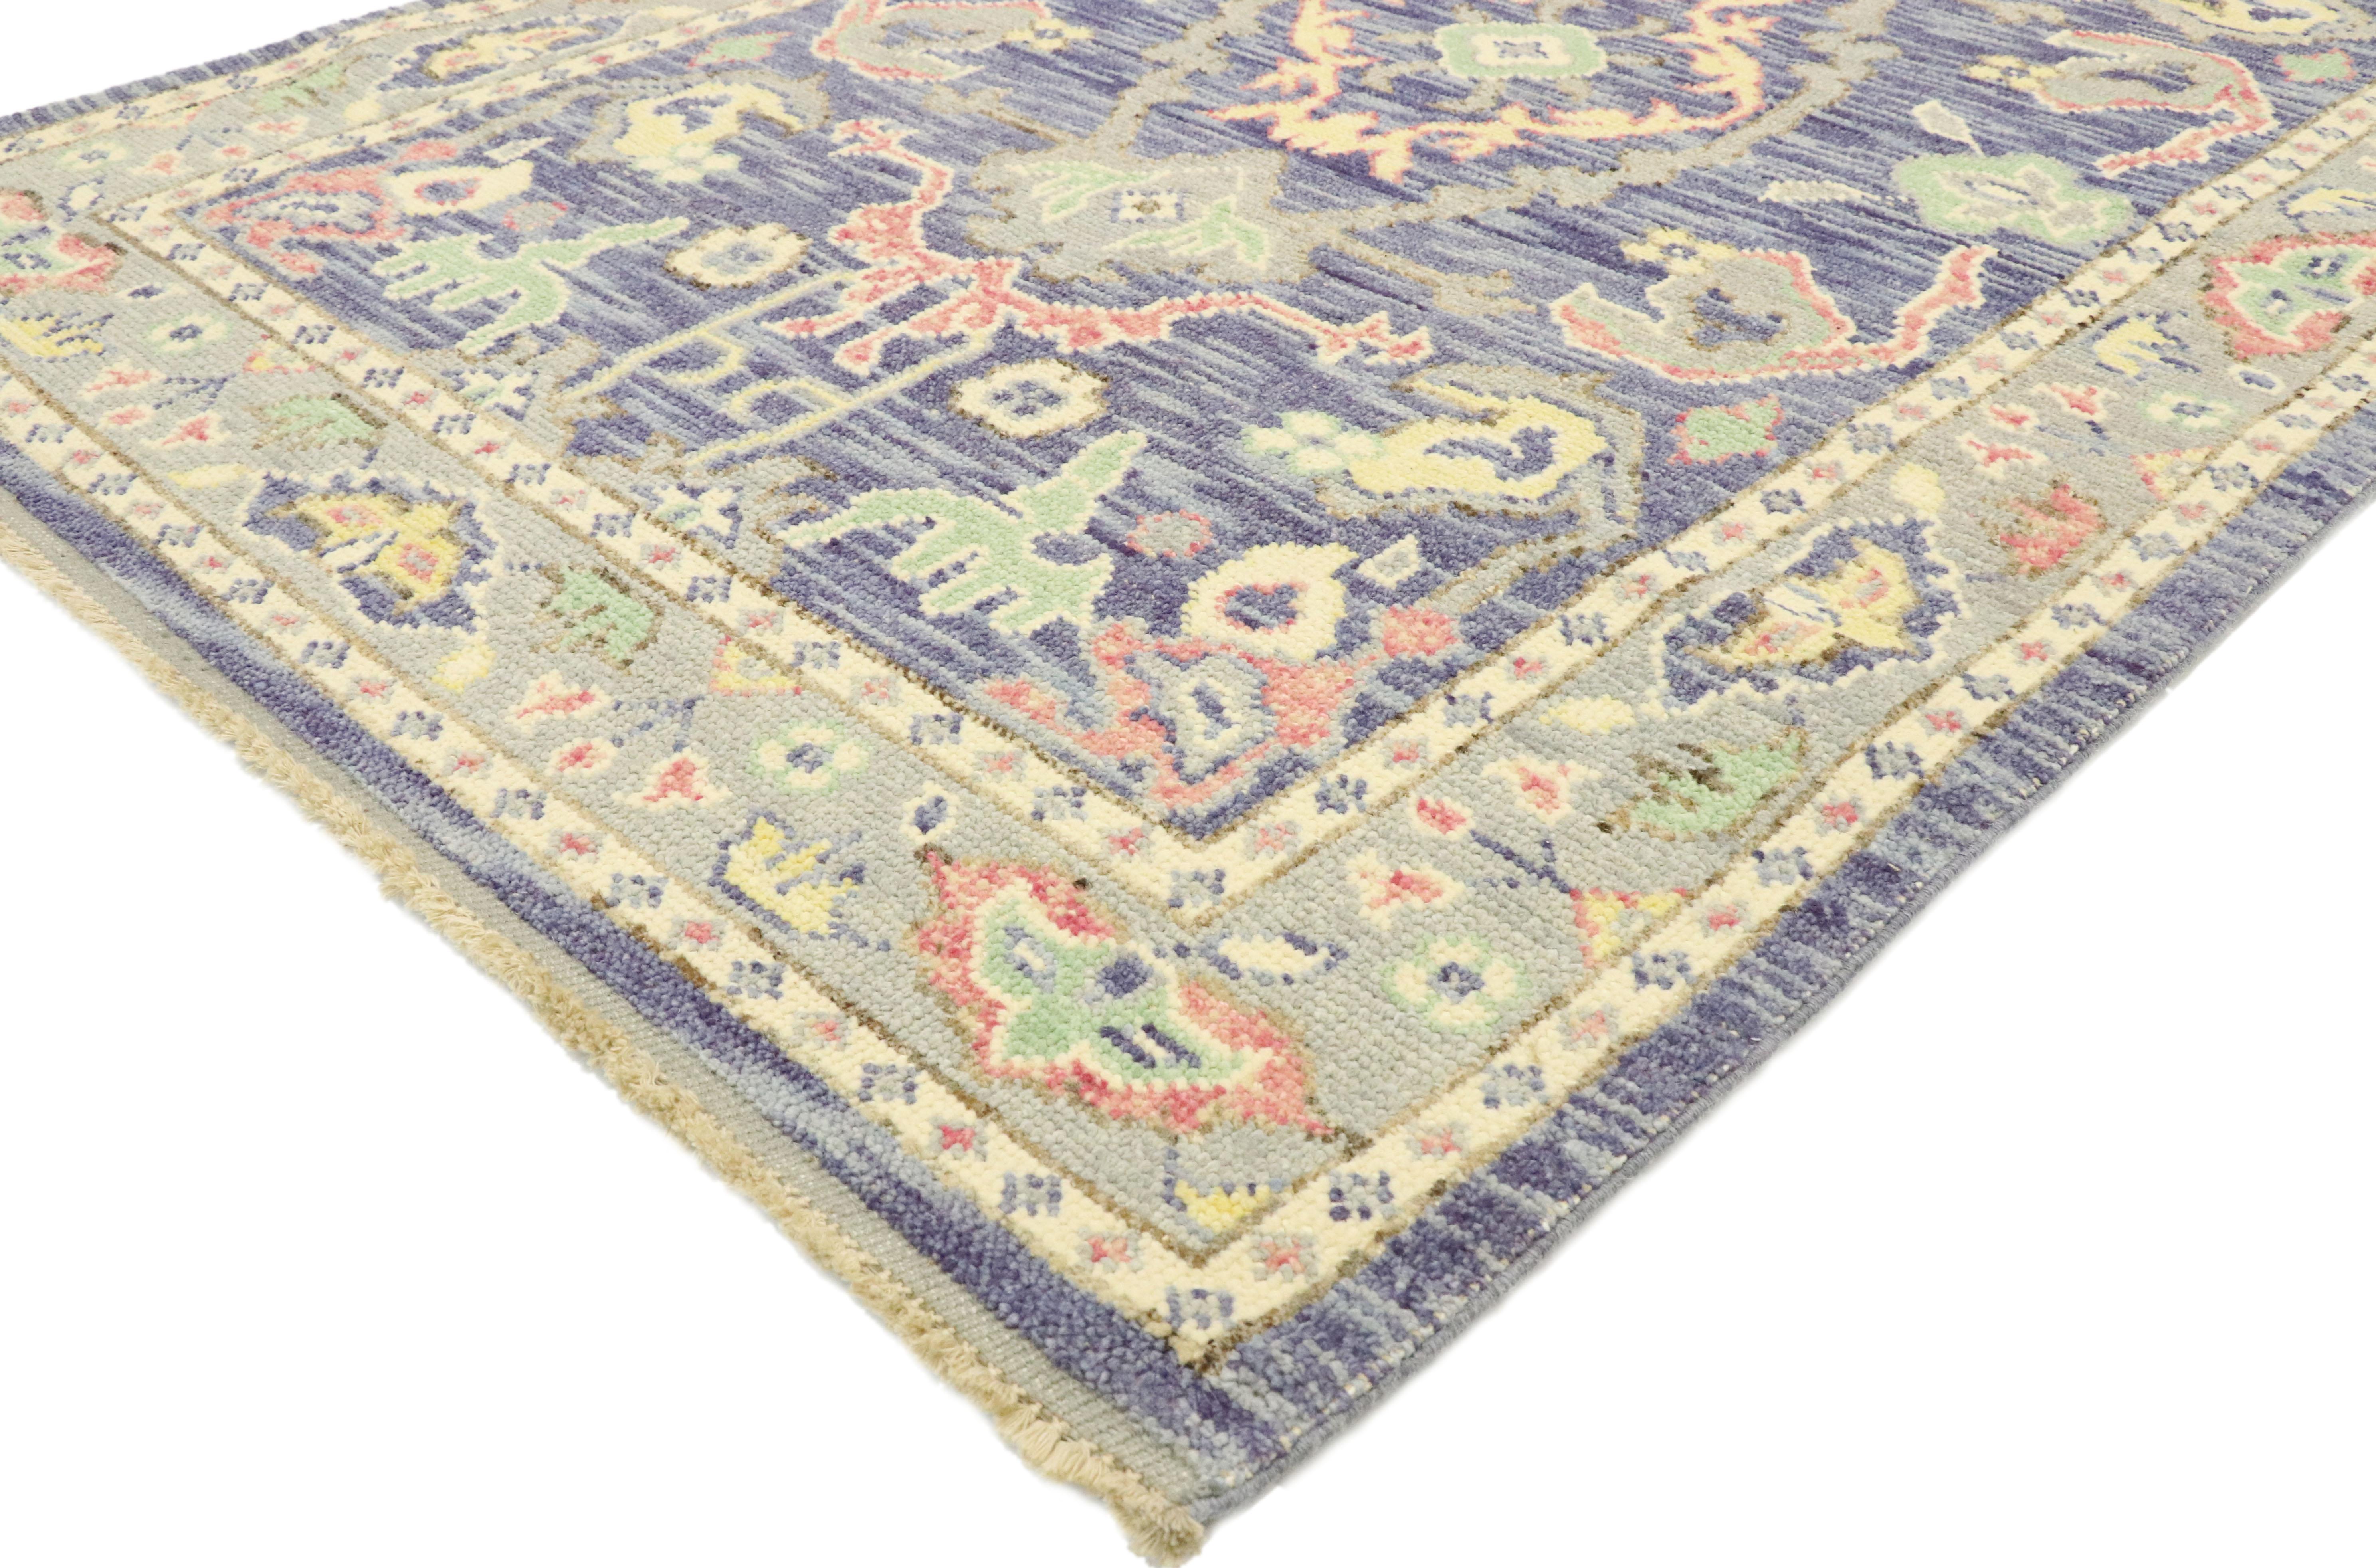 80594, new contemporary colorful purple Oushak rug with modern pastel style. Blending elements from the modern world with happy pastel colors, this hand knotted wool contemporary Oushak style area rug will boost the coziness factor in nearly any